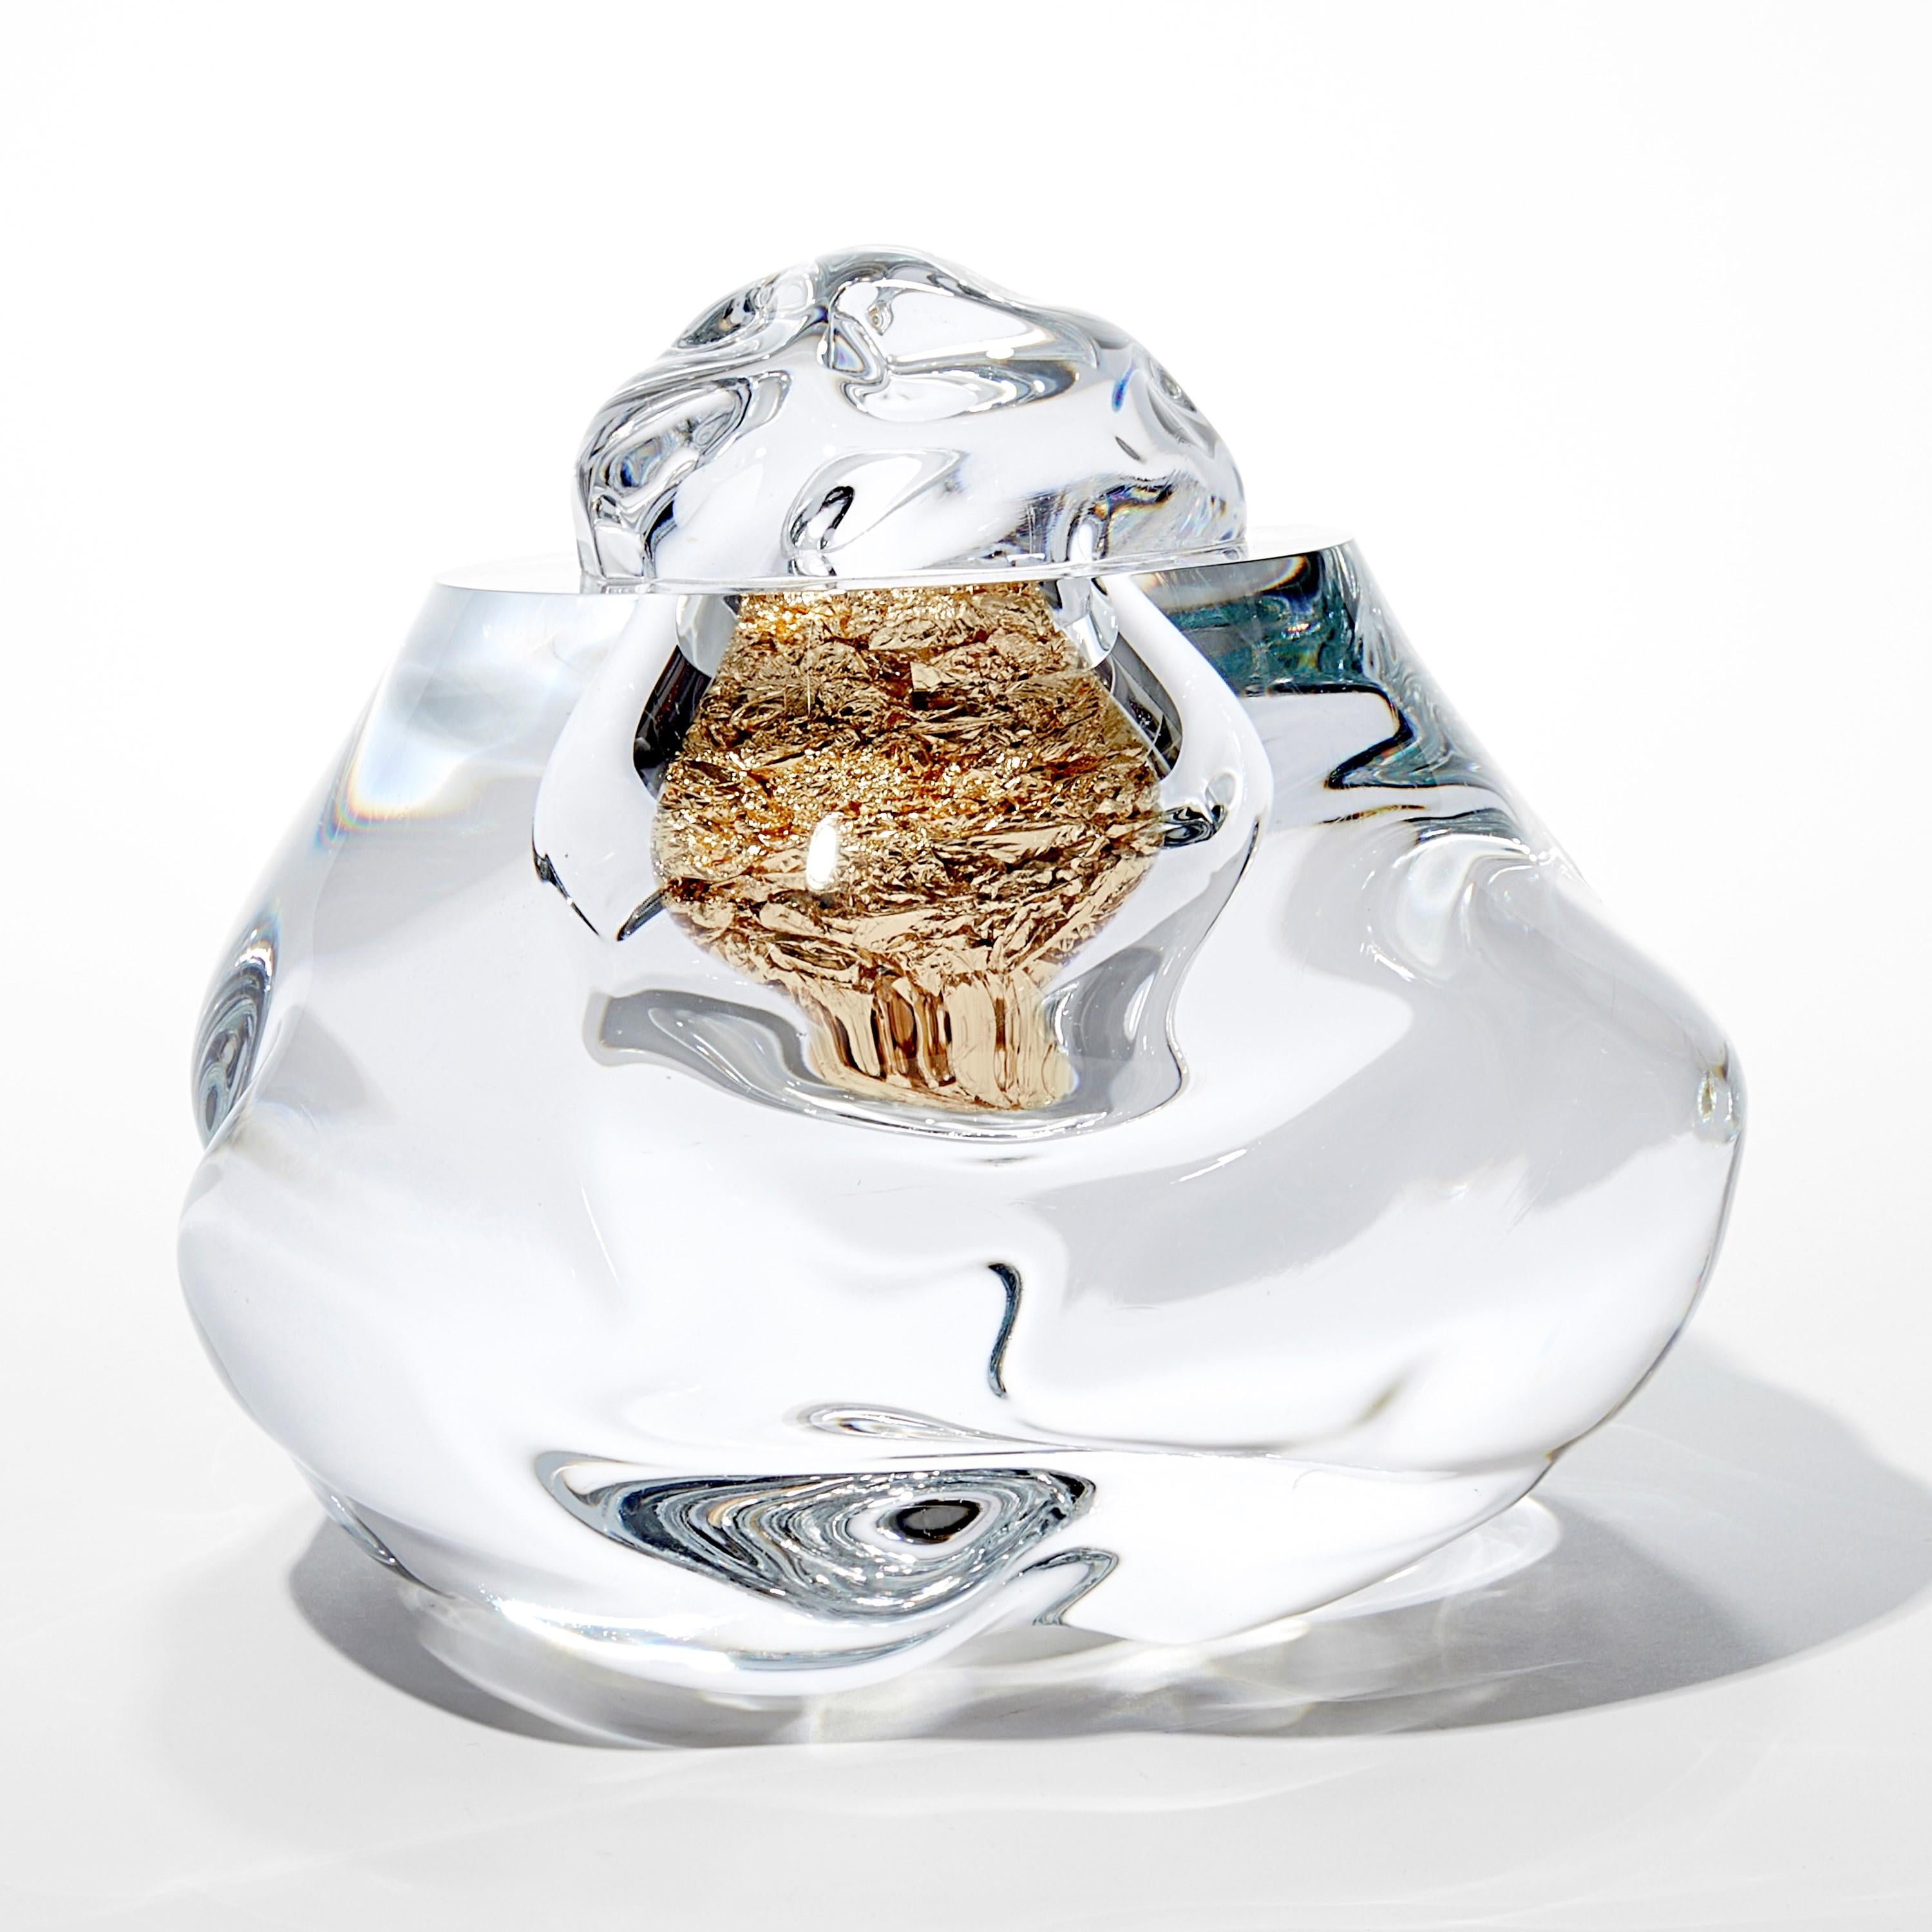 British Erratic L with 23ct Red Gold, amorphic optical glass sculpture by Anthony Scala For Sale